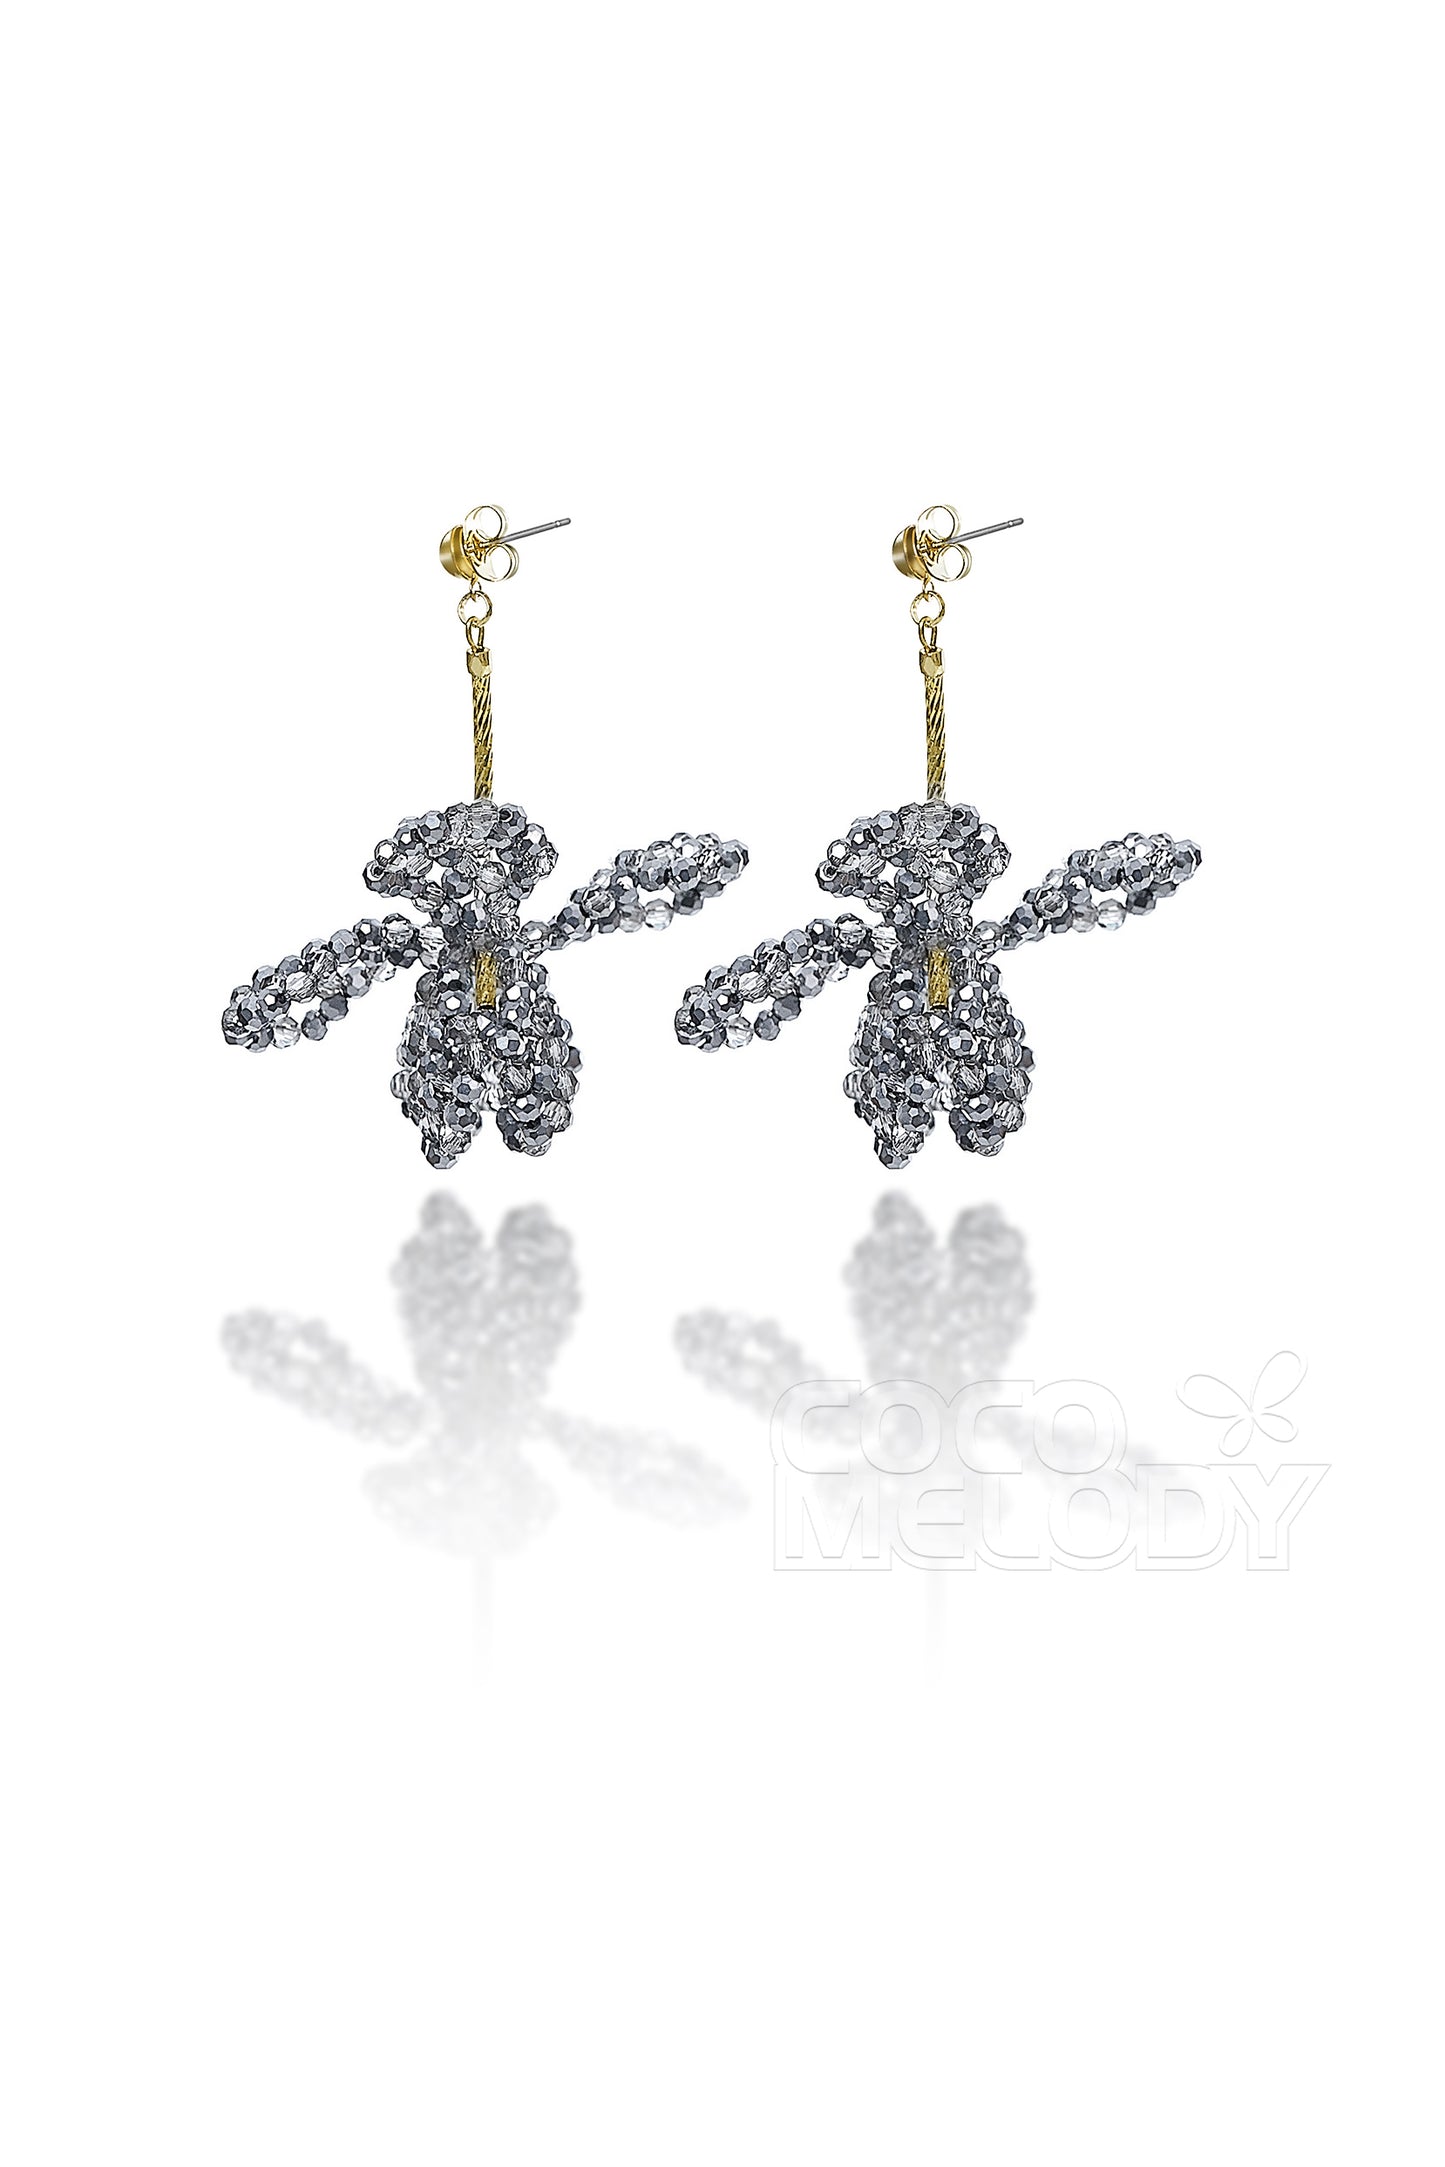 Fantastic Alloy Wedding Earrings with Crystals HG18006